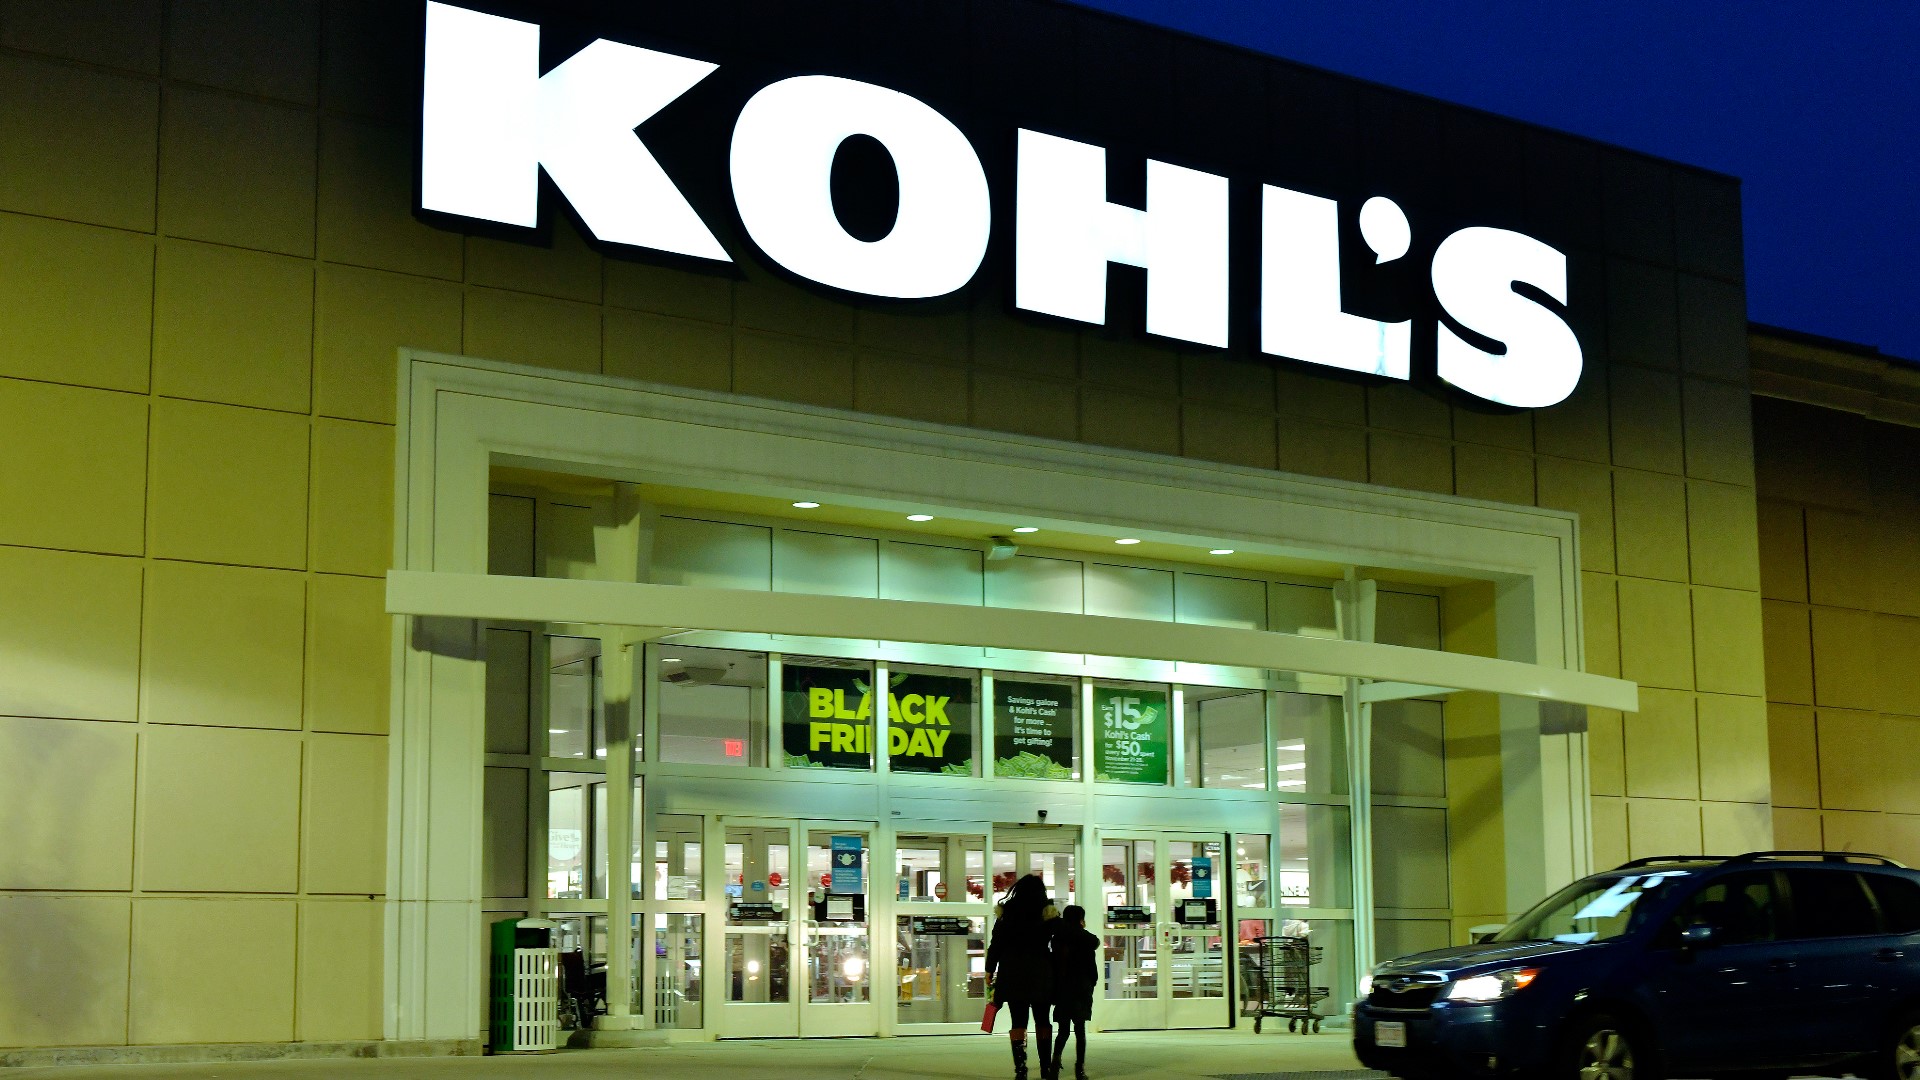 Kohl's wants help for the holidays.